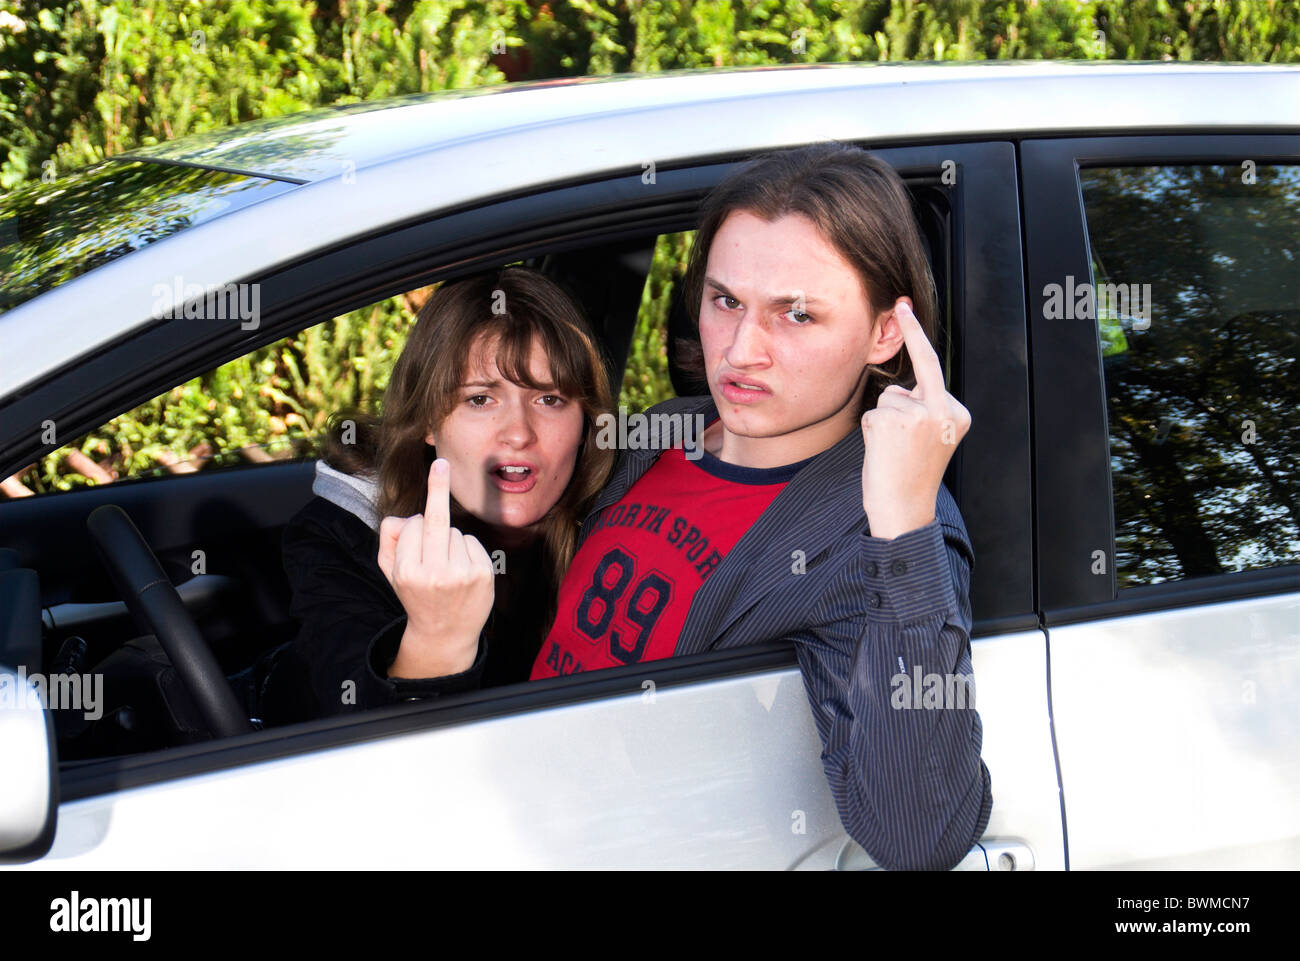 Road conflict. Woman showing middle finger and jeering someone outside her  car. Photos